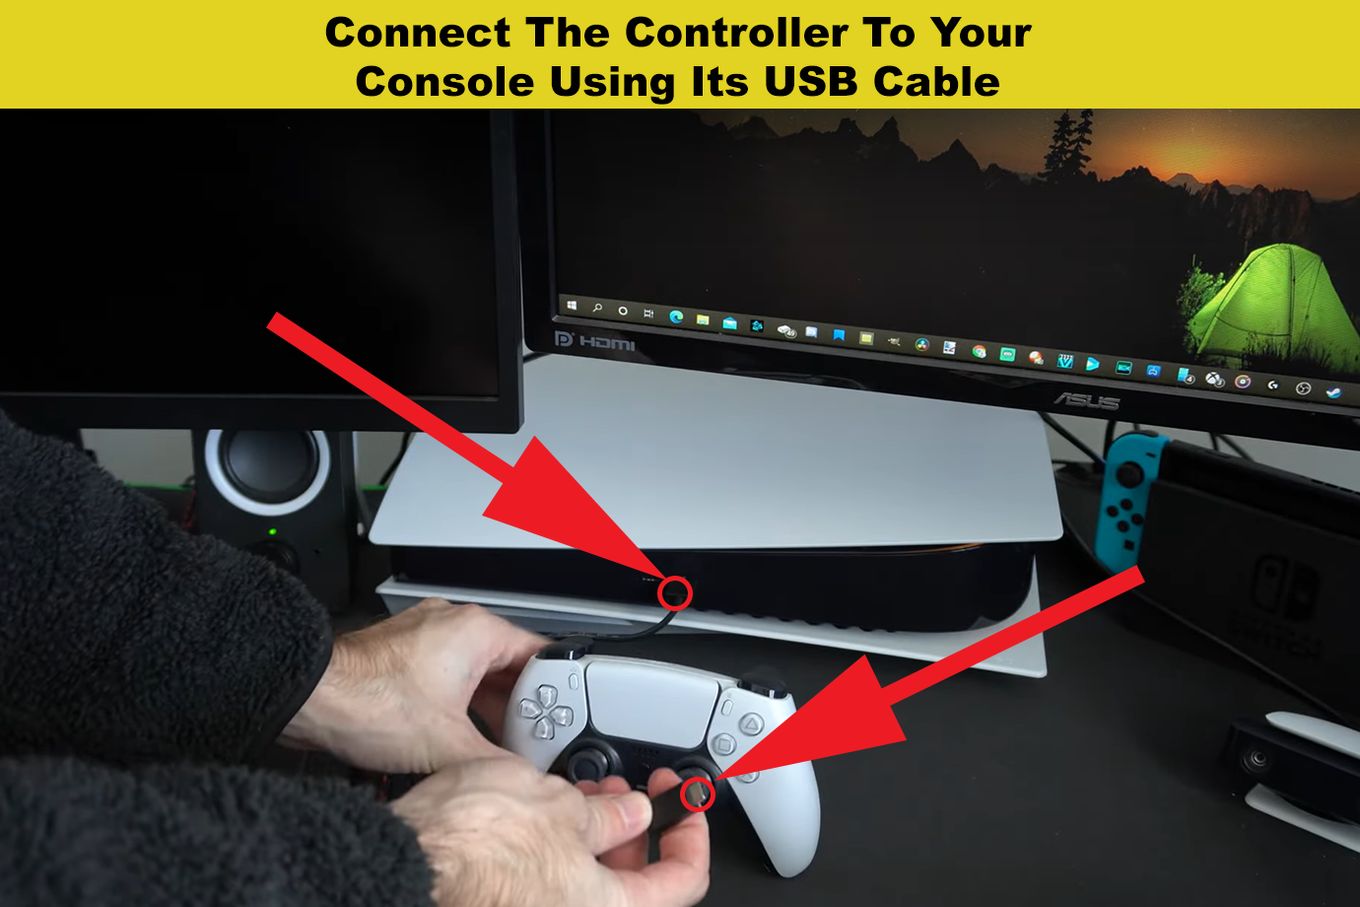 Connect Controller Using USB